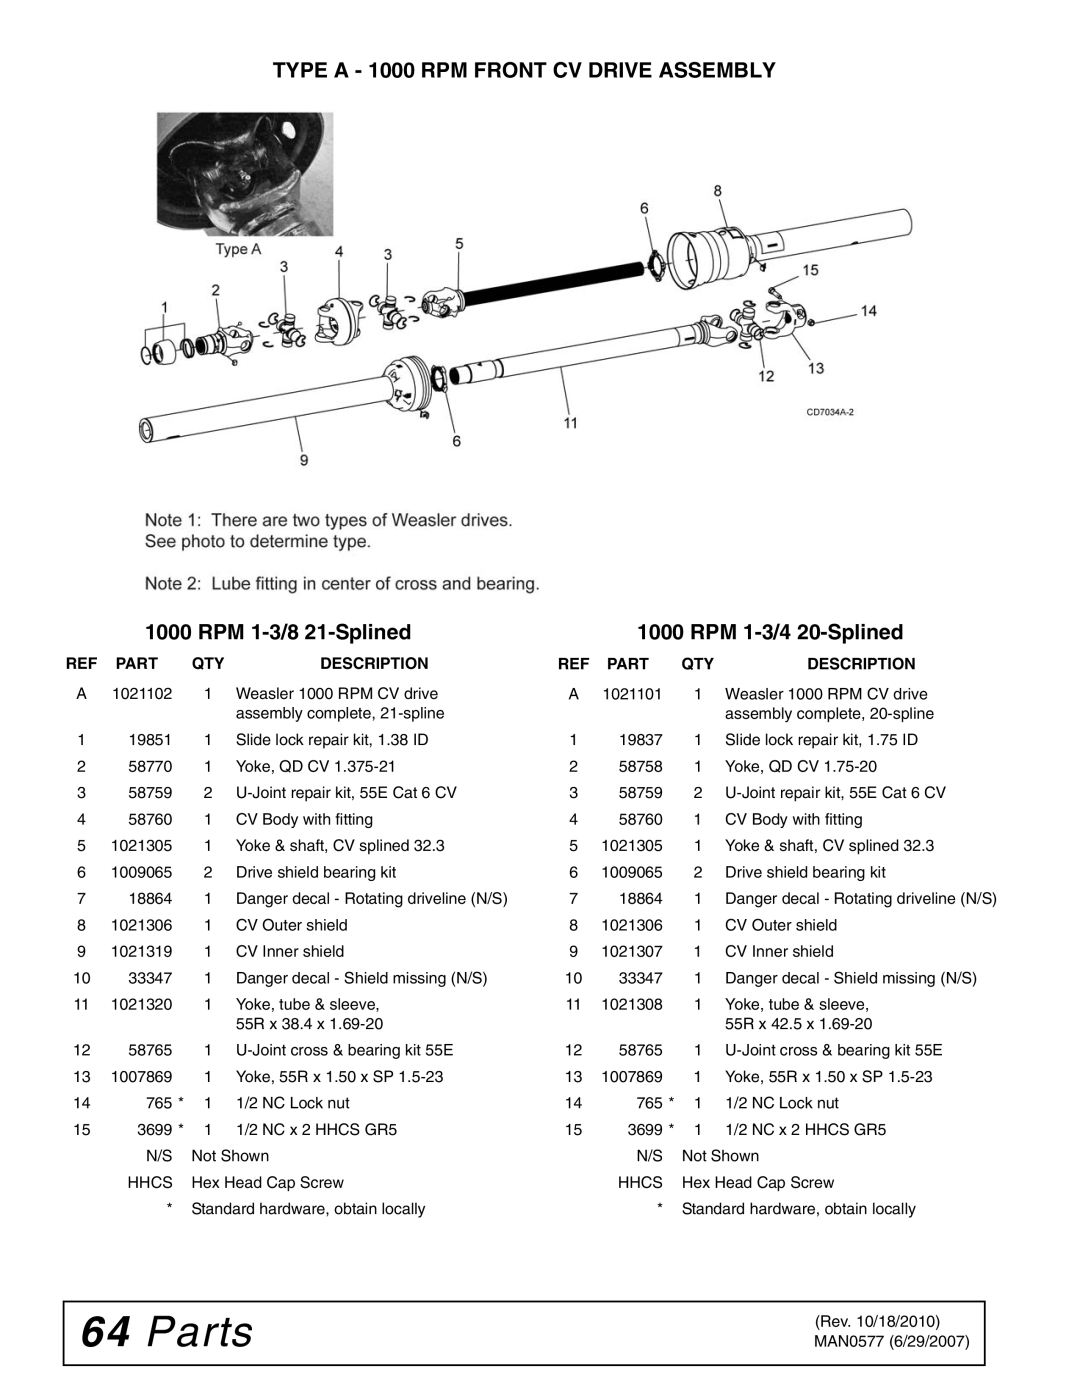 Woods Equipment TS1680Q manual Type a 1000 RPM Front CV Drive Assembly, RPM 1-3/8 21-Splined, RPM 1-3/4 20-Splined 